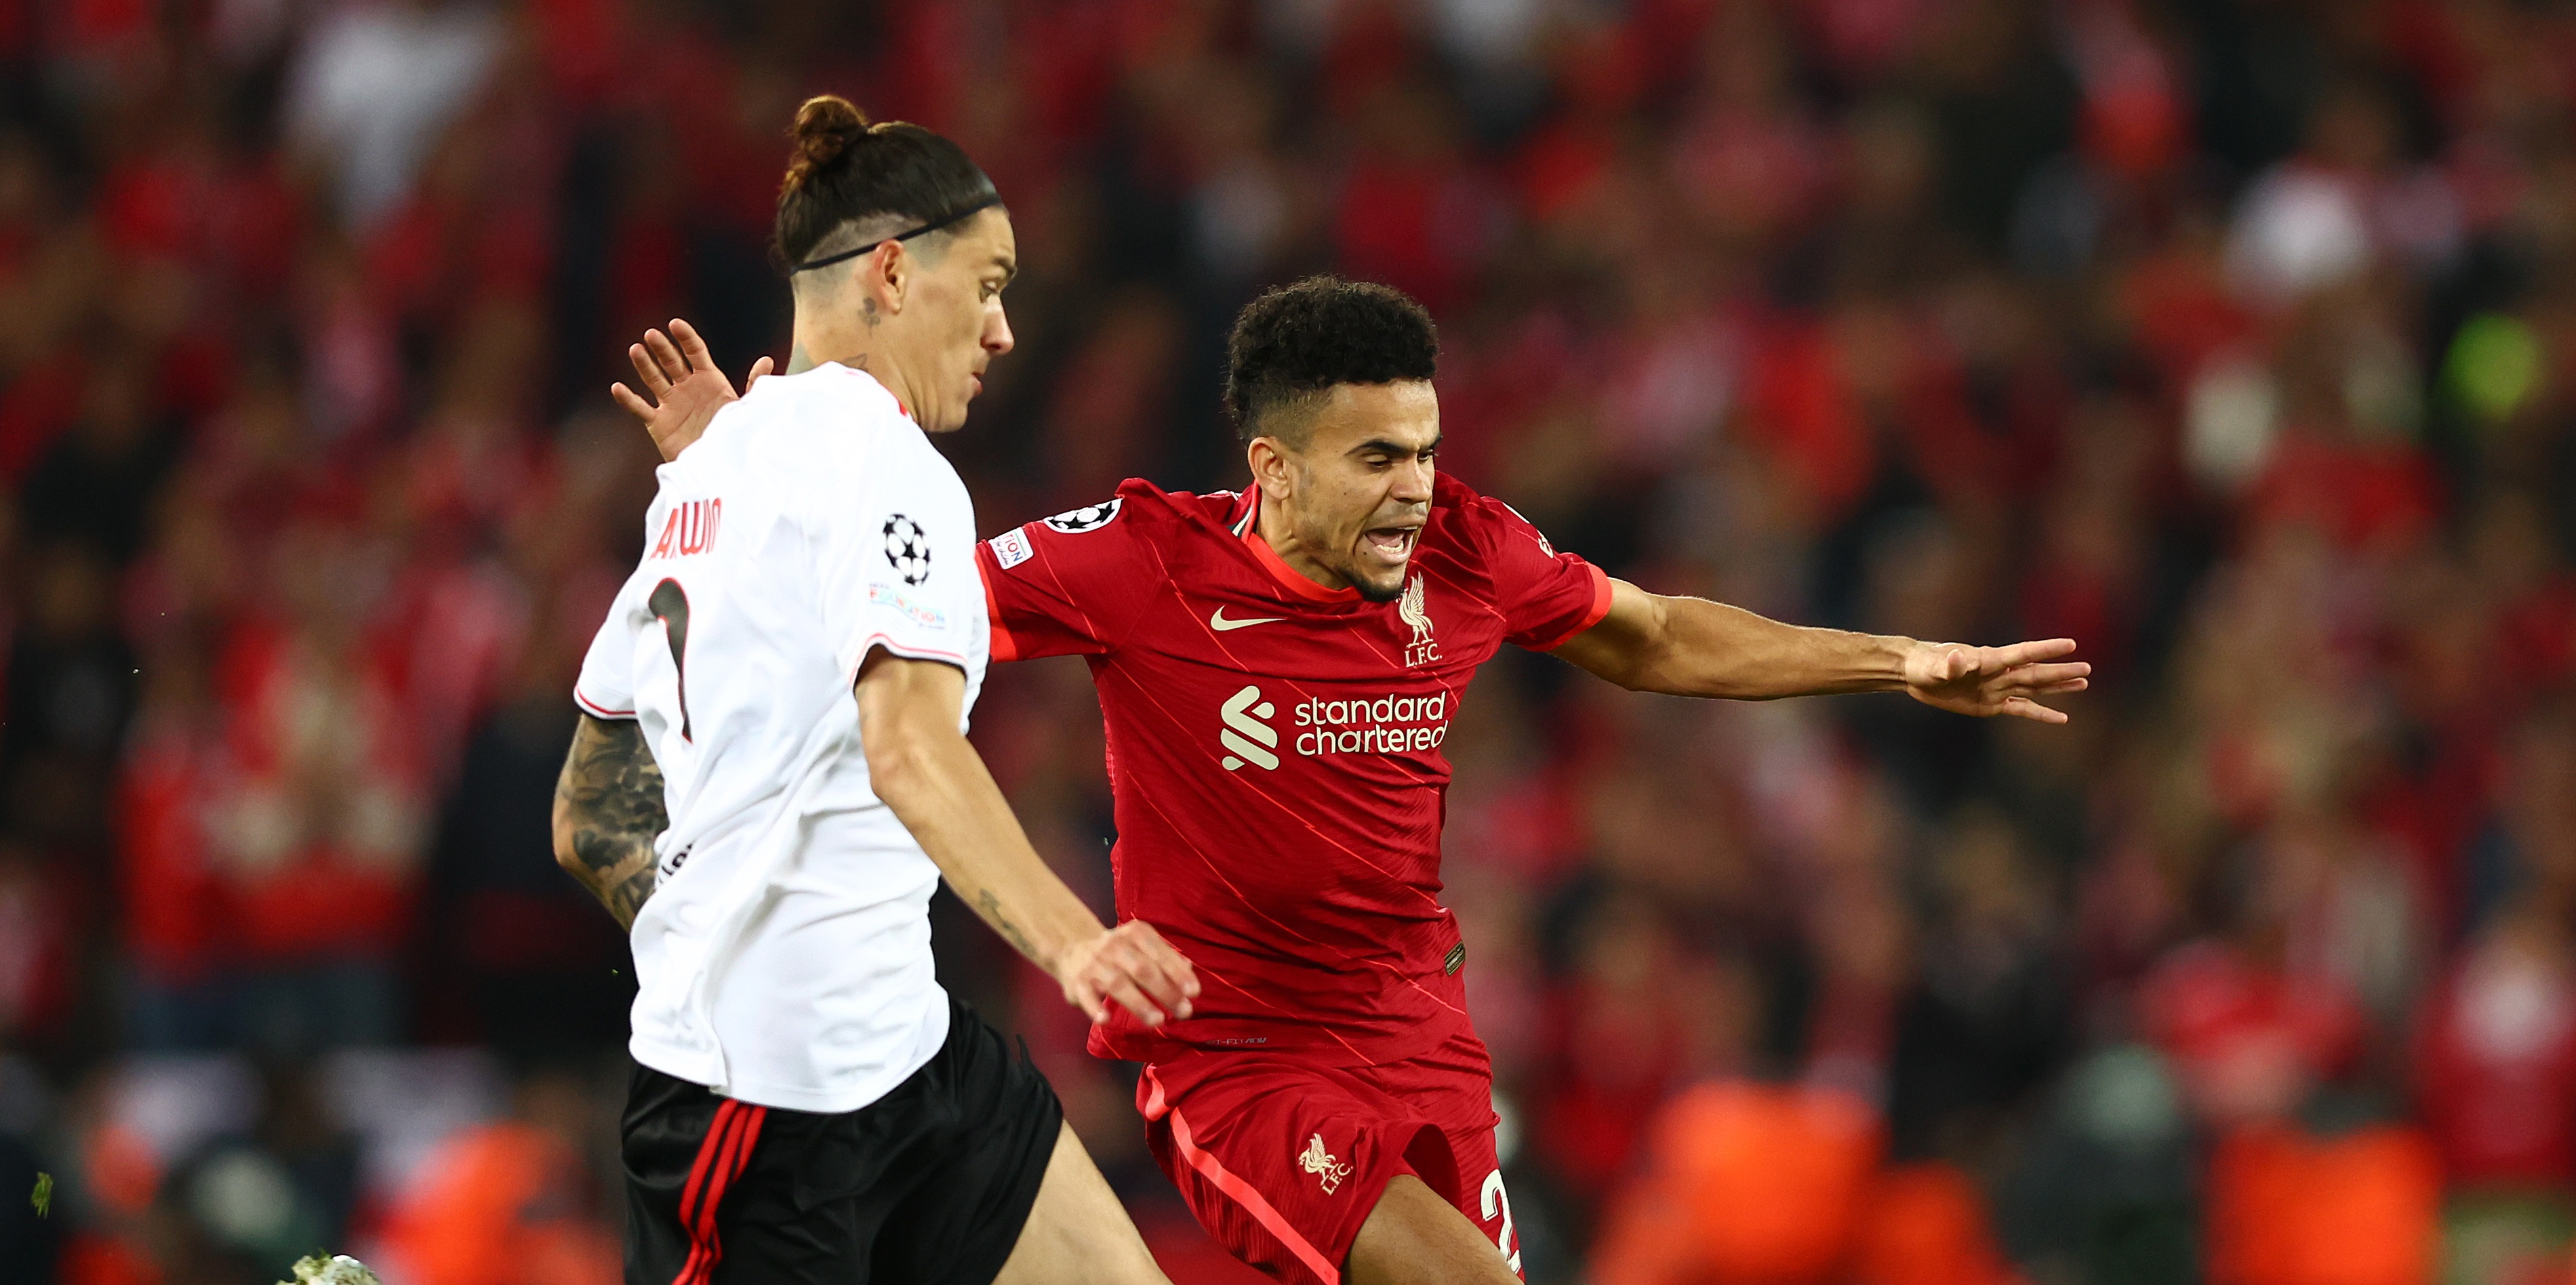 Steve McManaman’s Darwin Nunez comments have resurfaced as the Uruguayan edges closer to Liverpool switch